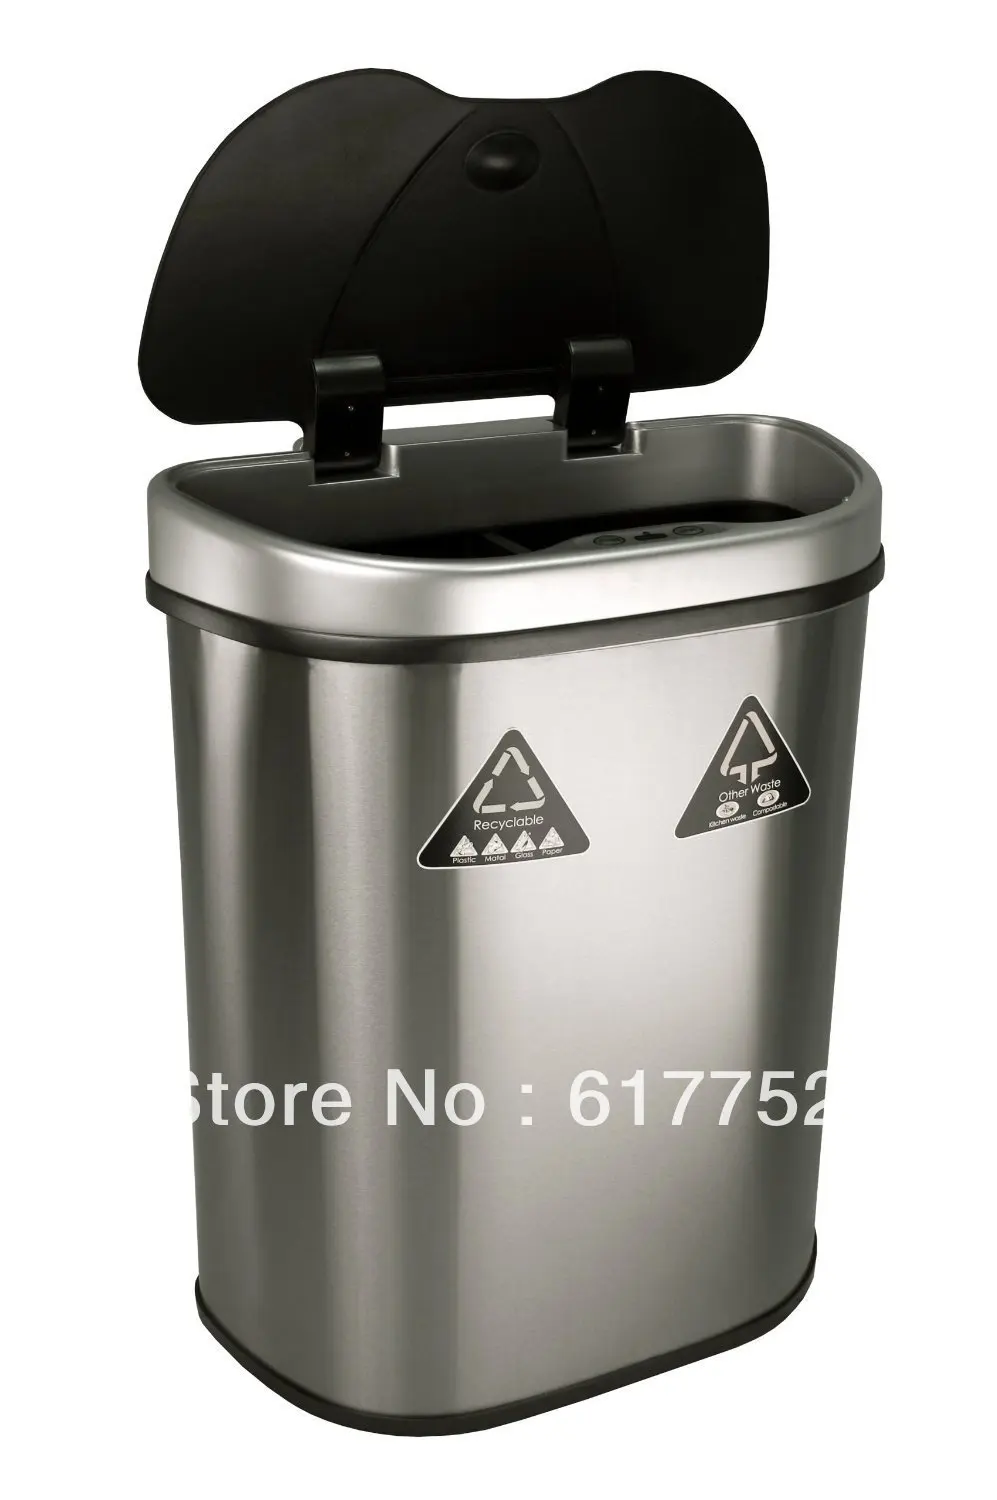 Nine Stars DZT 70 11R Trash Can/Recycler, Infrared Touchless